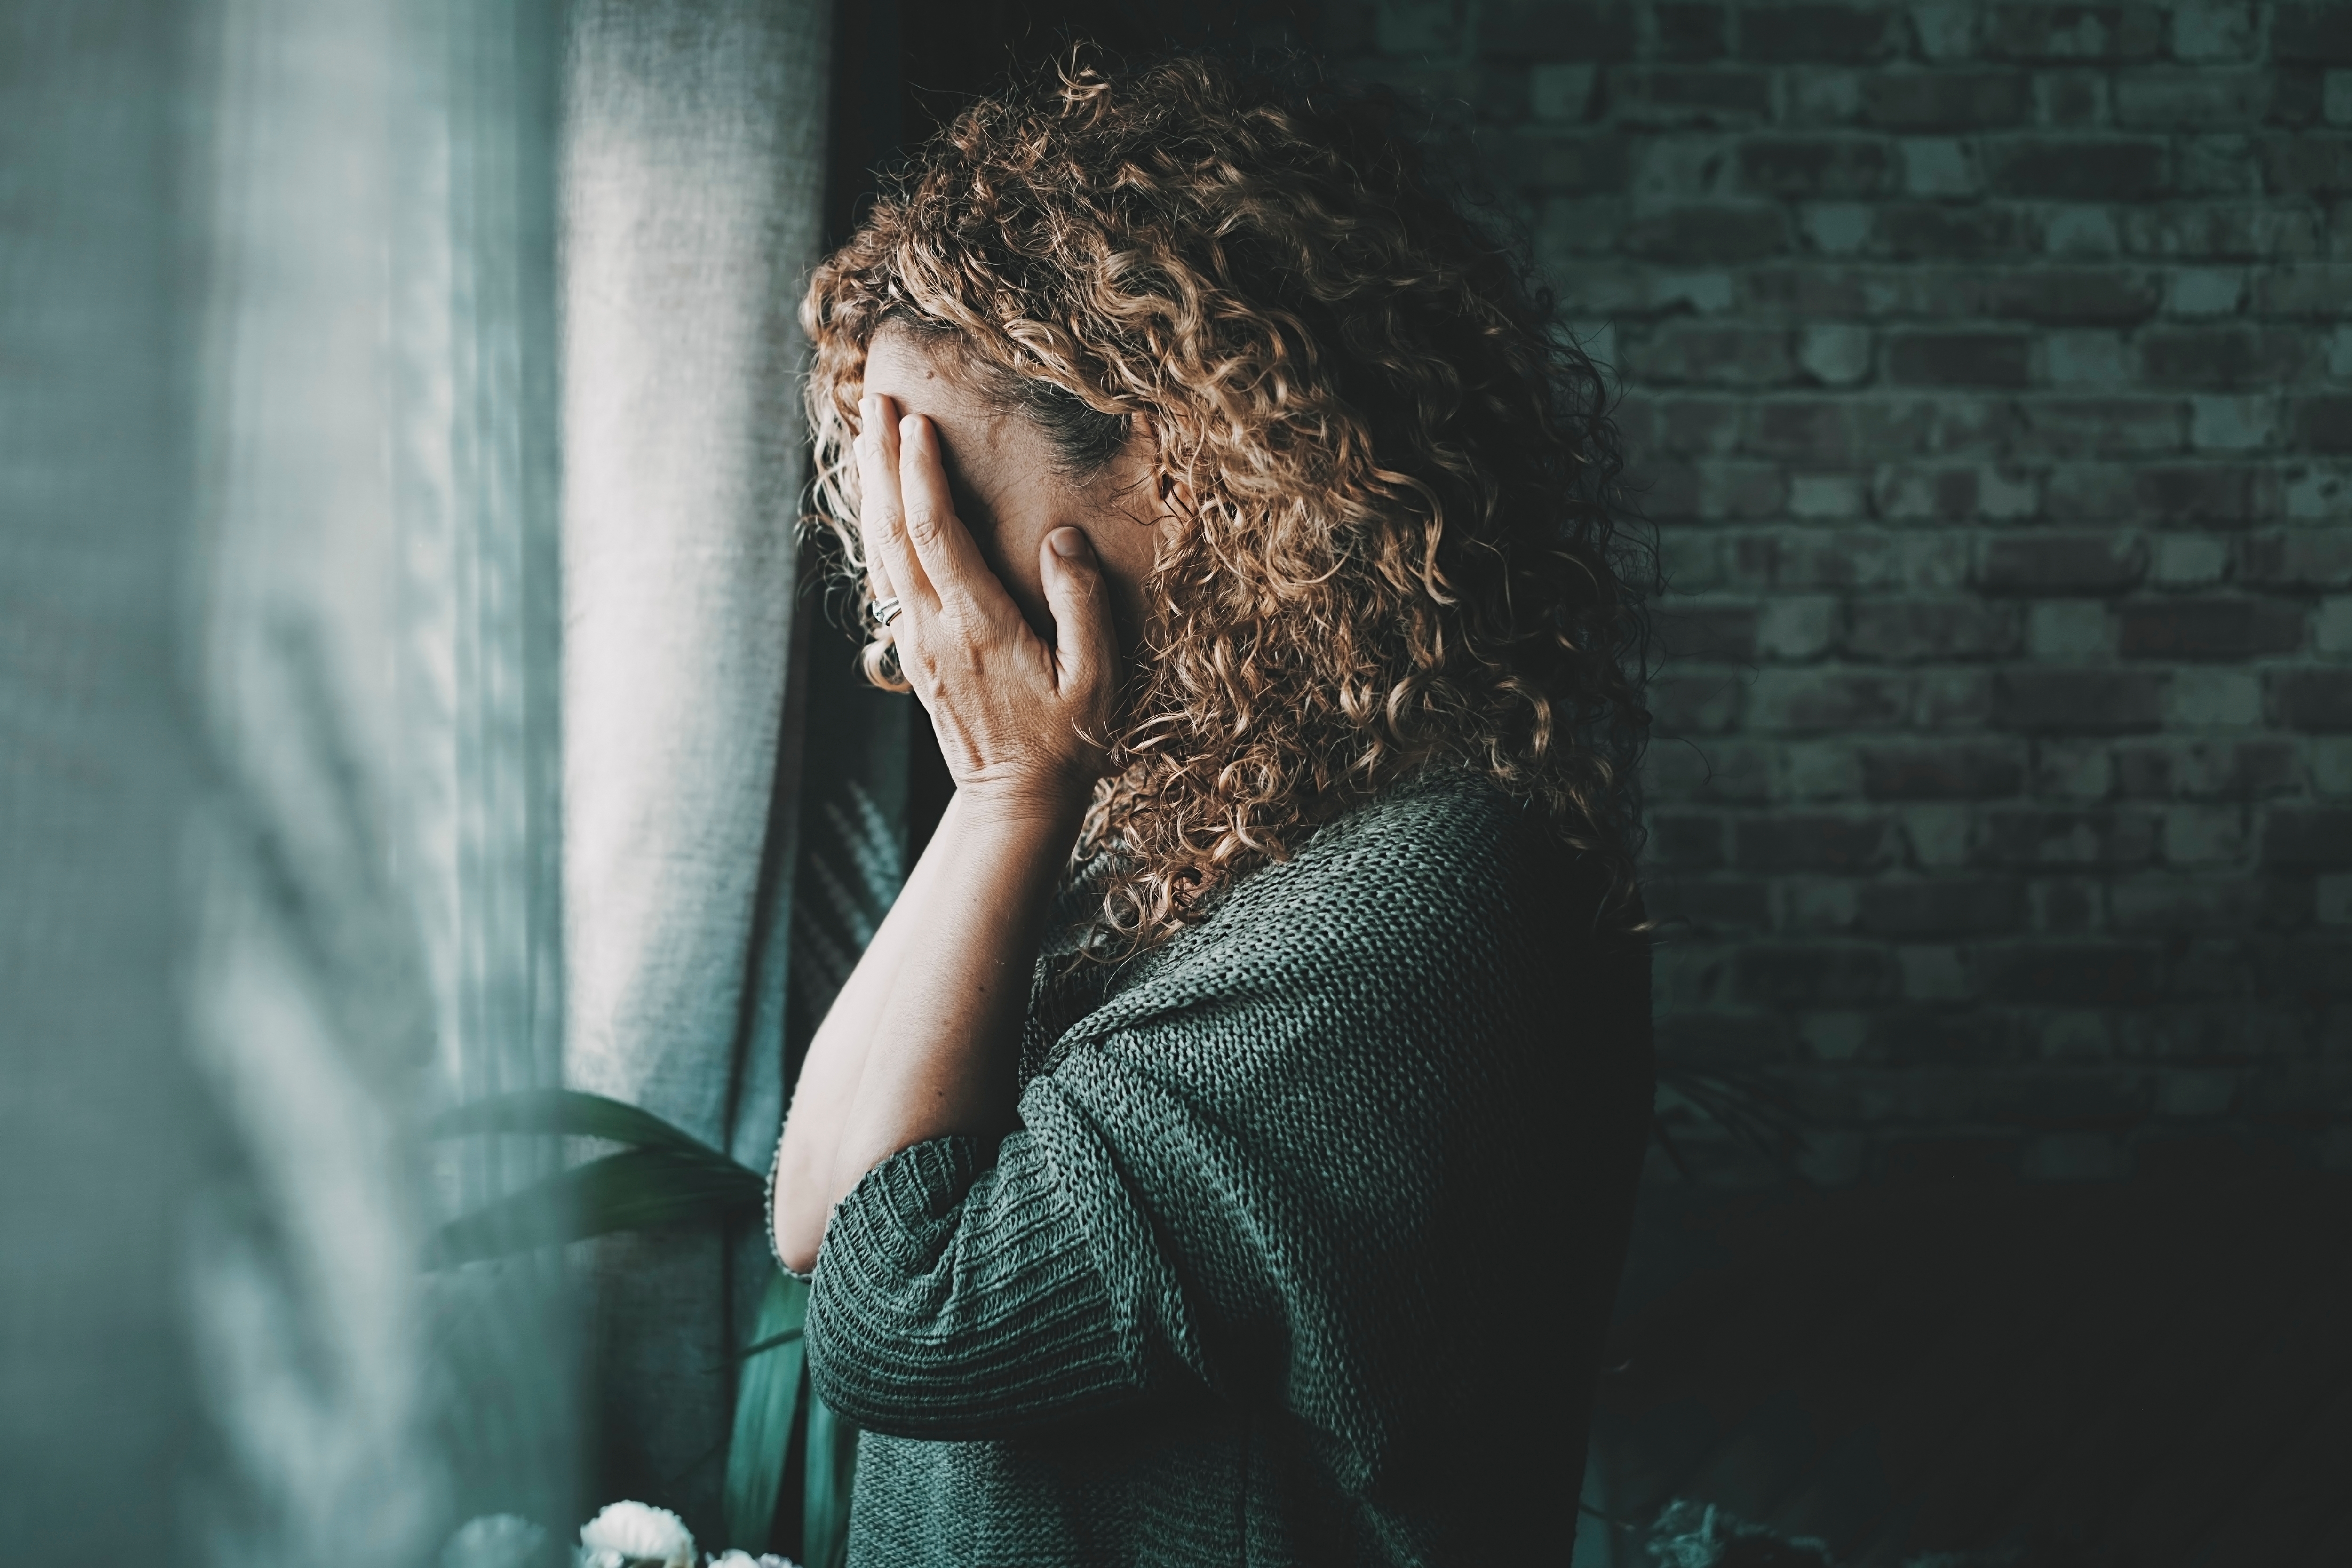 Sad and worried woman side portrait. | Source: Shutterstock